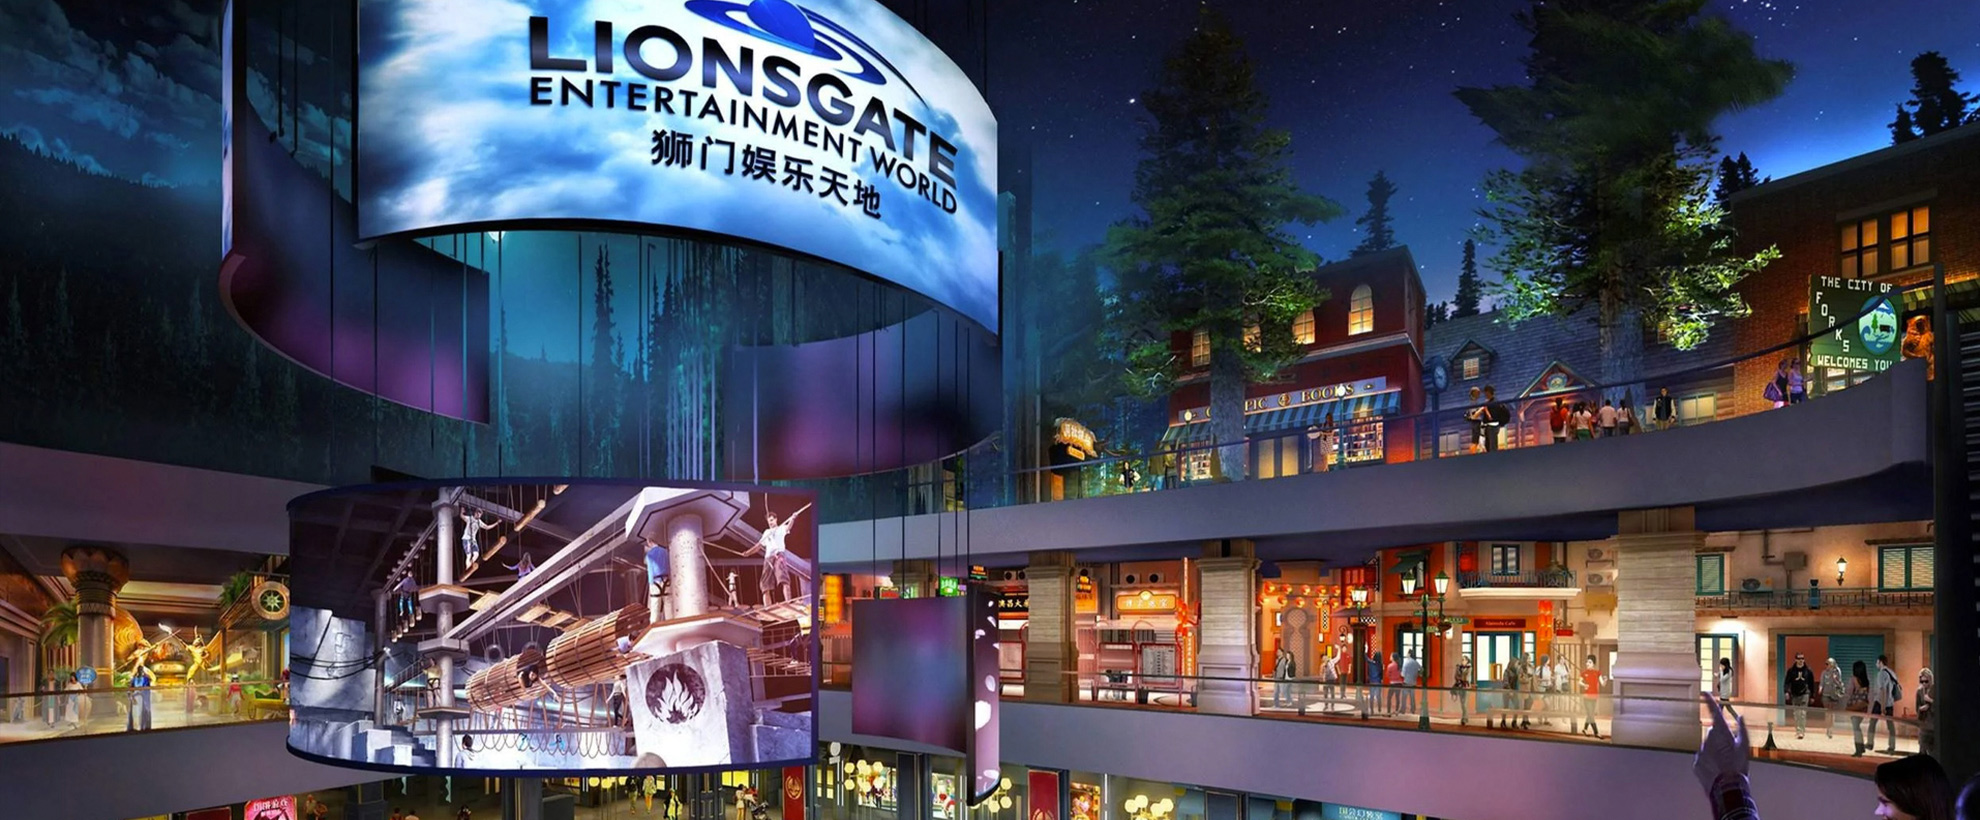 An outdoor retail location with a large electronic billboard showing Lionsgate in black text. There are multiple stories of shops and restaurants with people in.